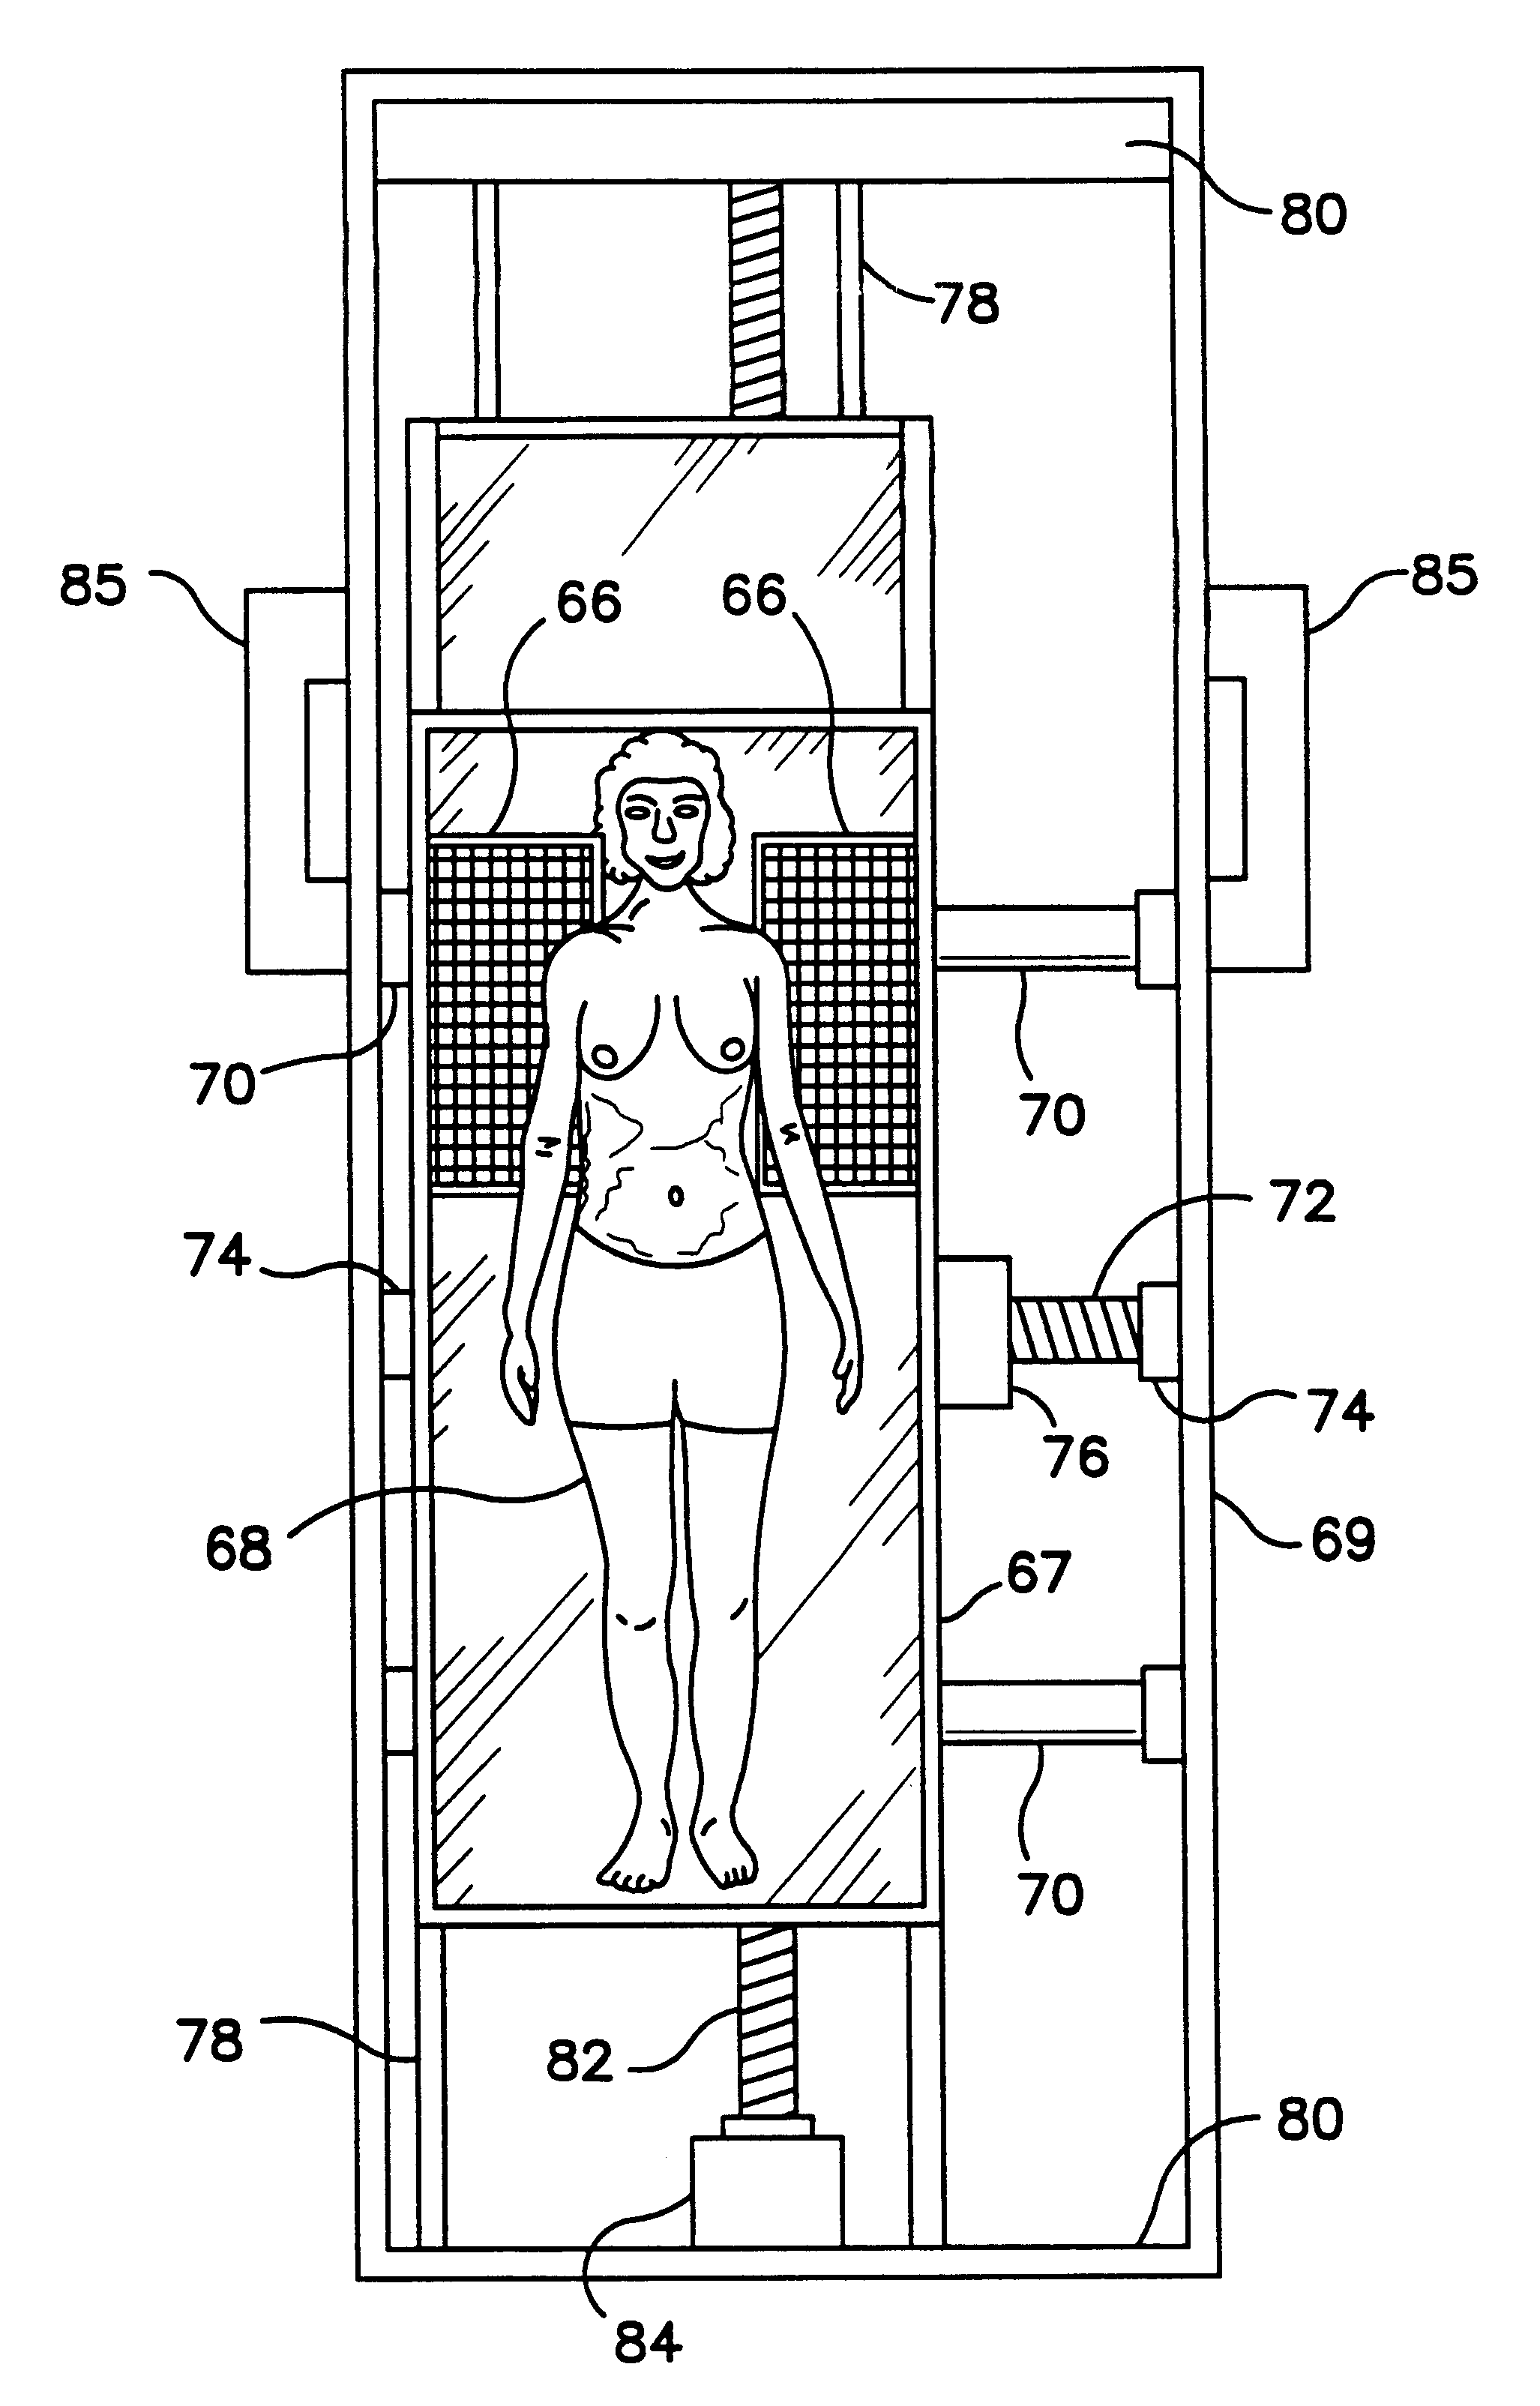 Method and apparatus for detecting very small breast anomalies